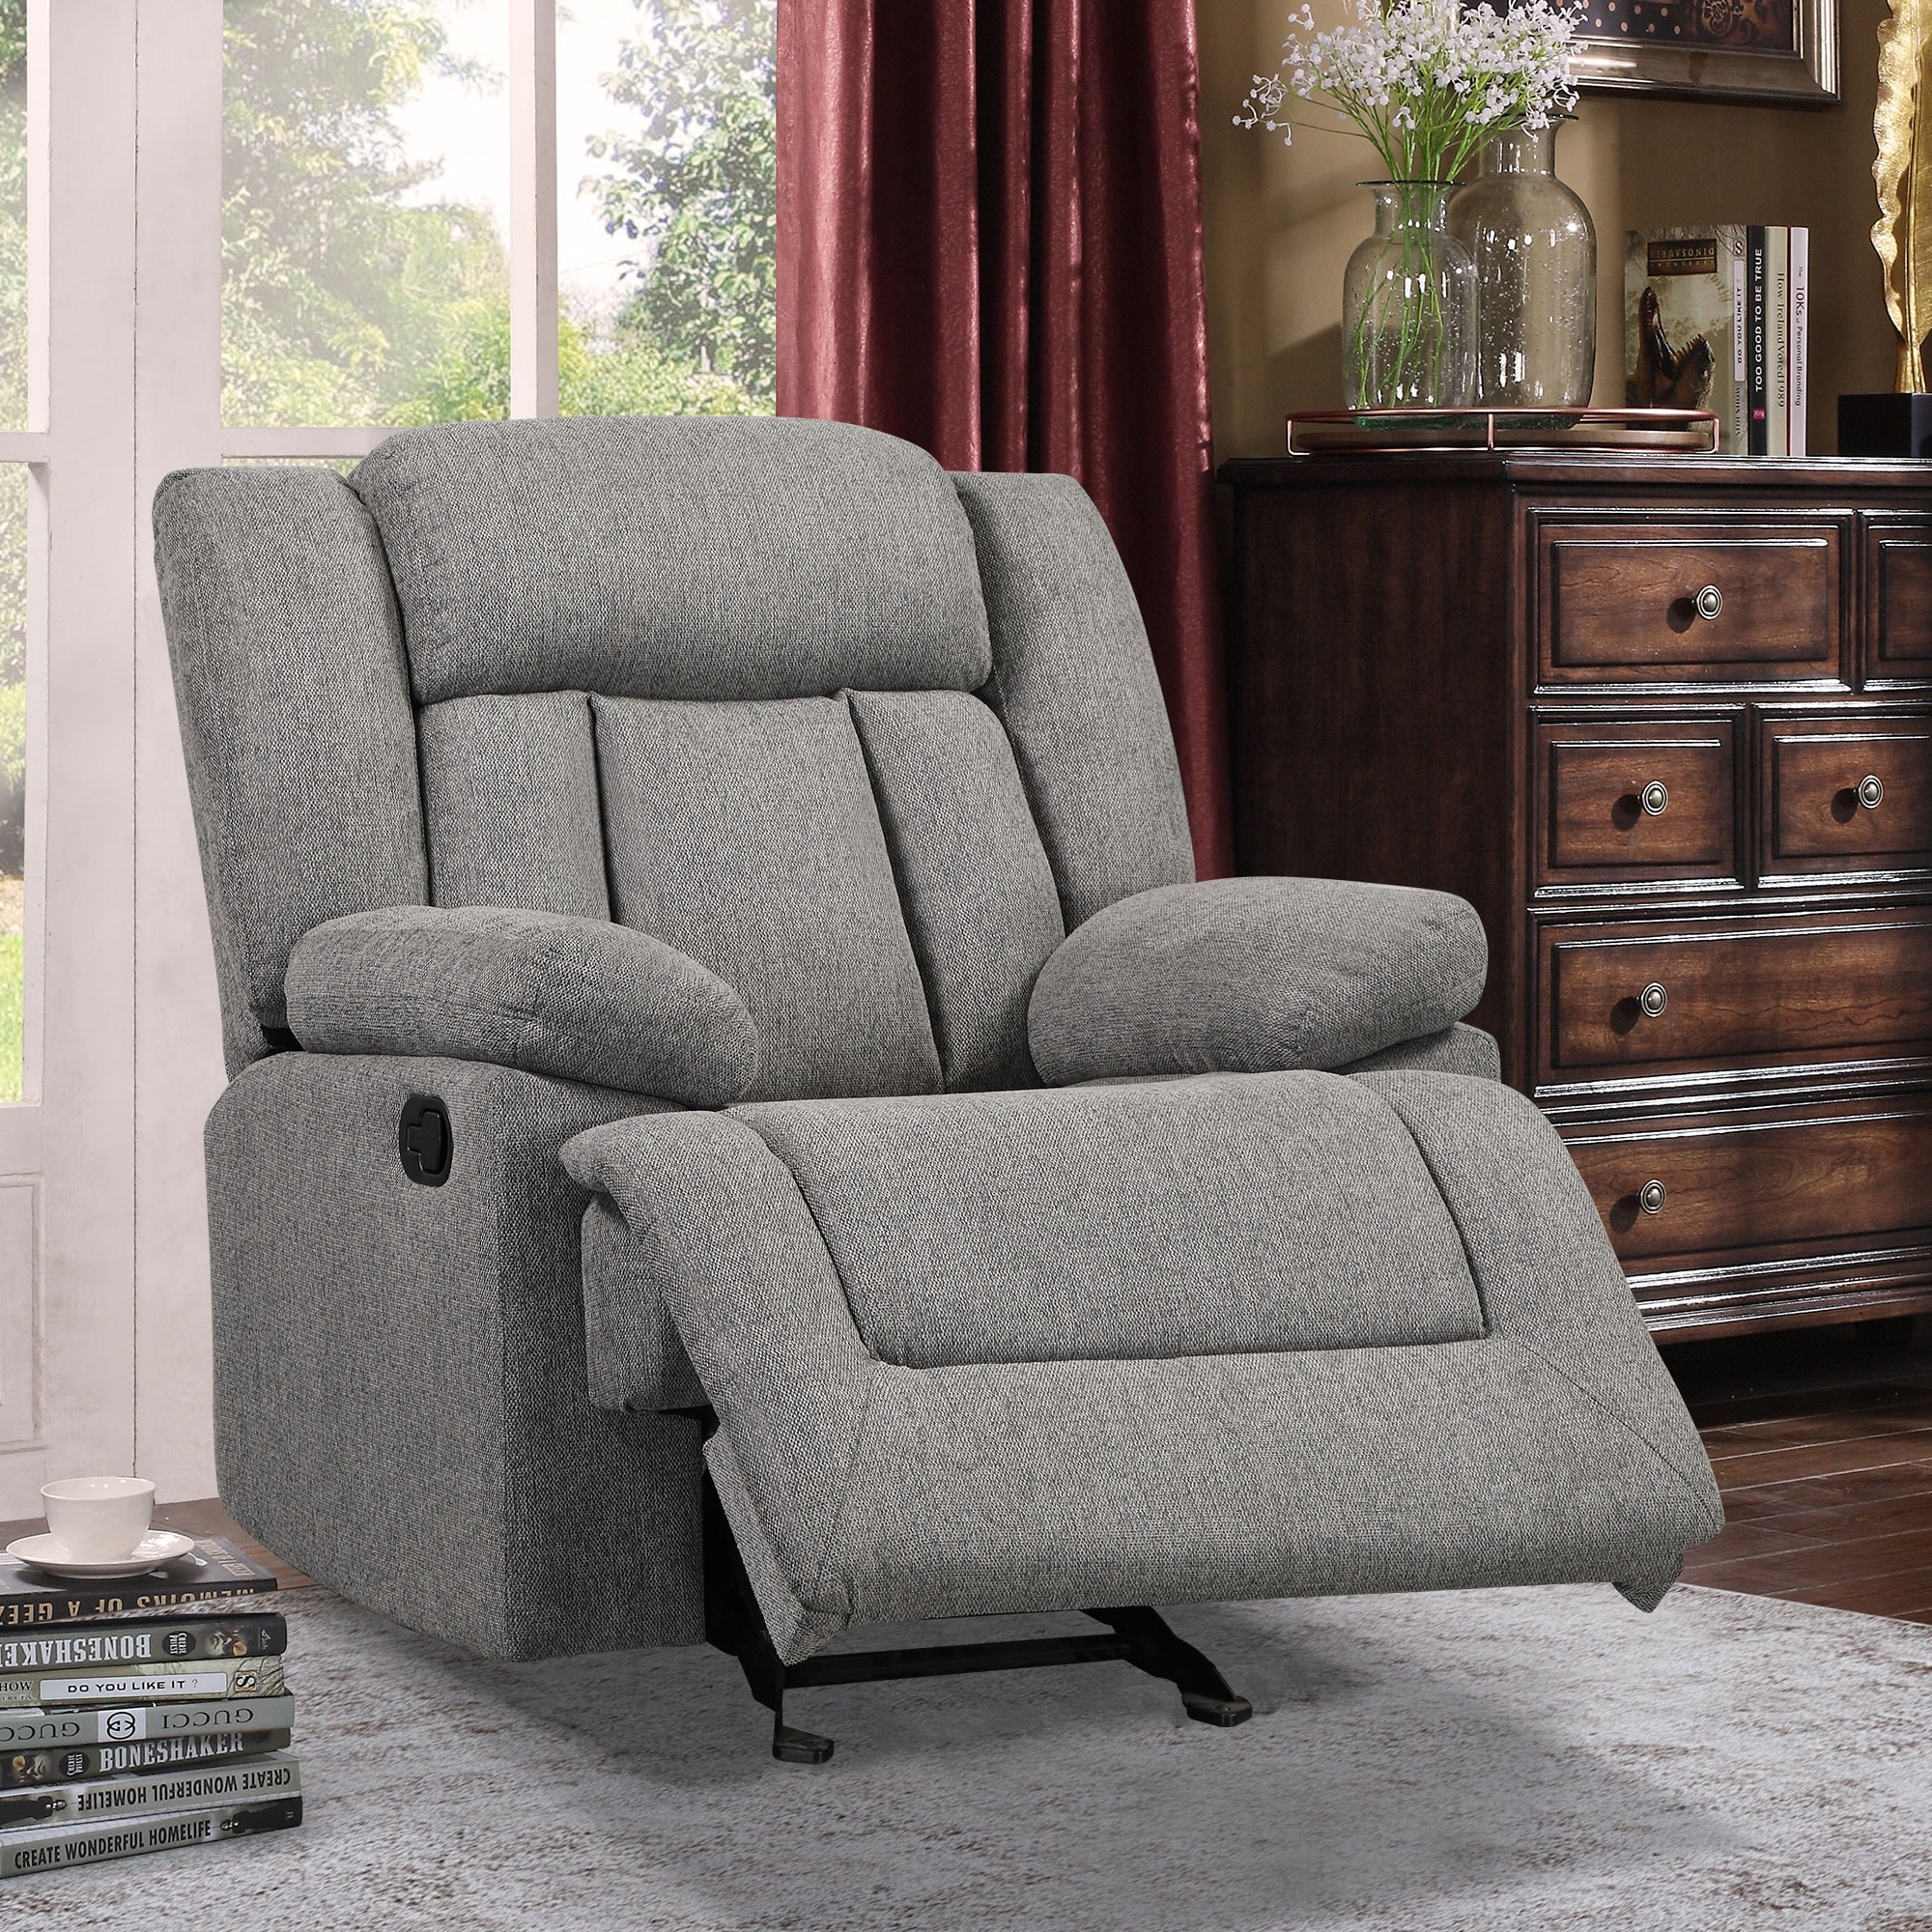 https://ak1.ostkcdn.com/images/products/is/images/direct/8d9add03fee174ee70eaaeb8547ca0de7b327e1f/CTEX-Fabric-Recliner-Chair-Adjustable-Home-Theater-Single-Recliner-Thick-Seat-and-Backrest%2C-Rocking-Sofa-for-Living-Room.jpg